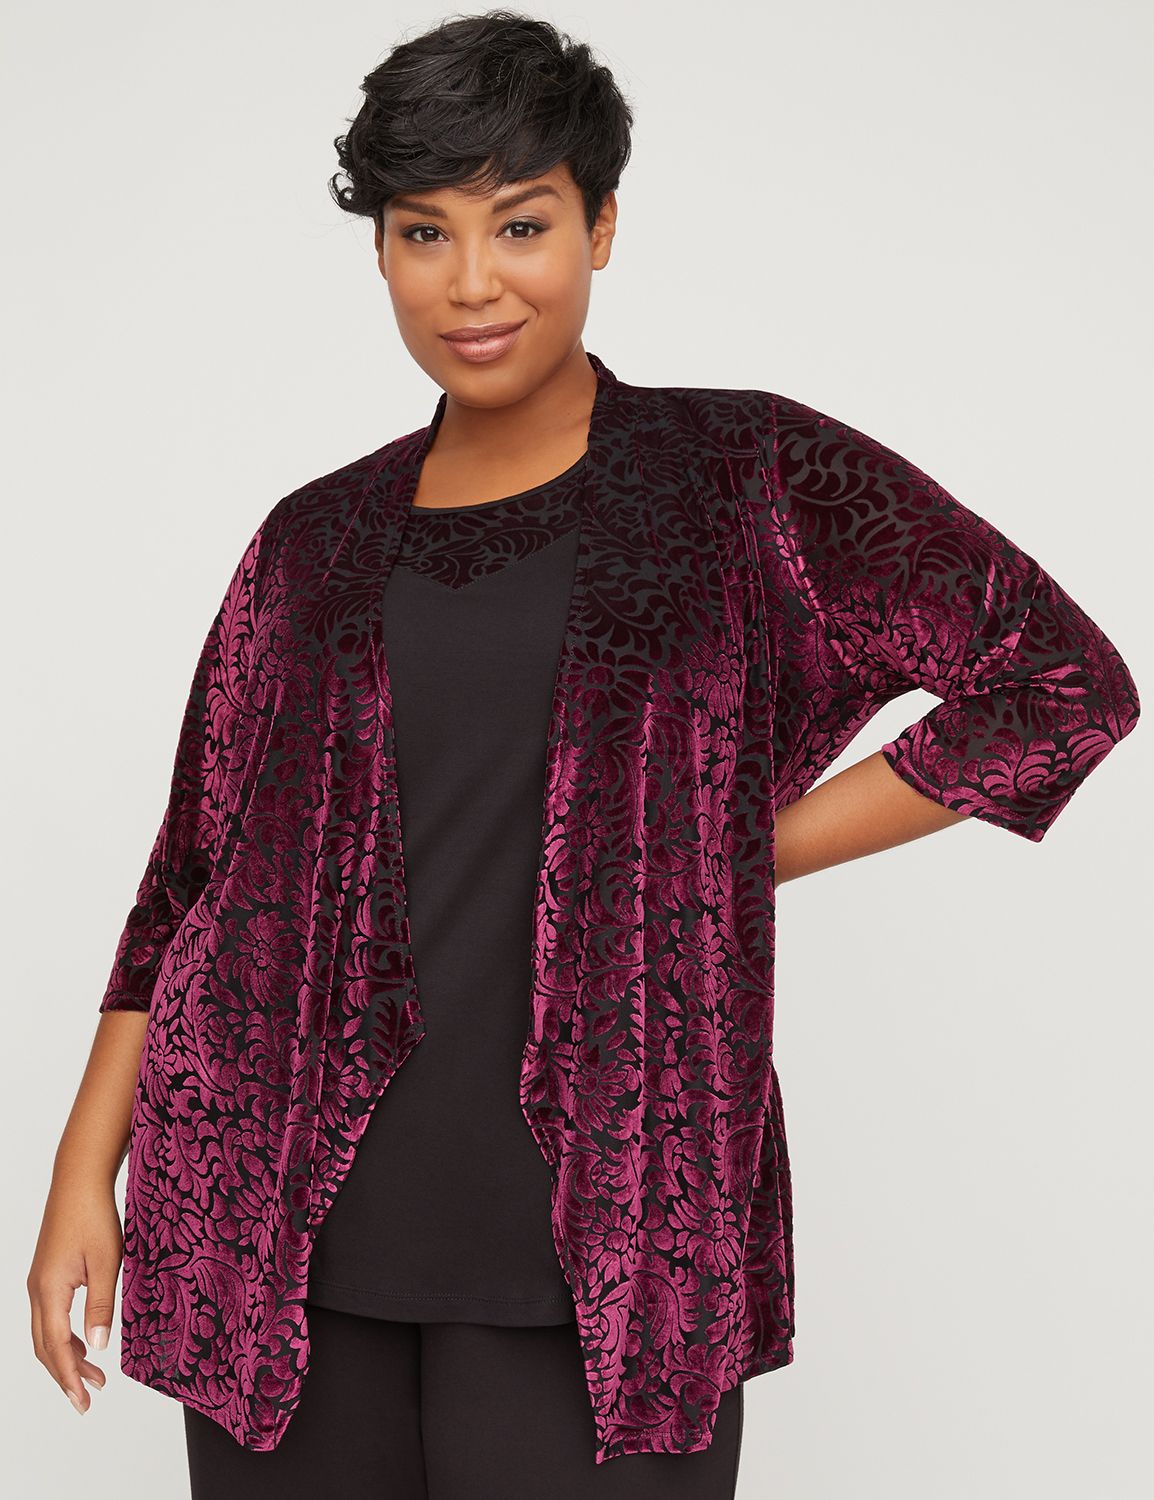 Women's Plus Size Sweaters & Holiday Sweaters | Catherines